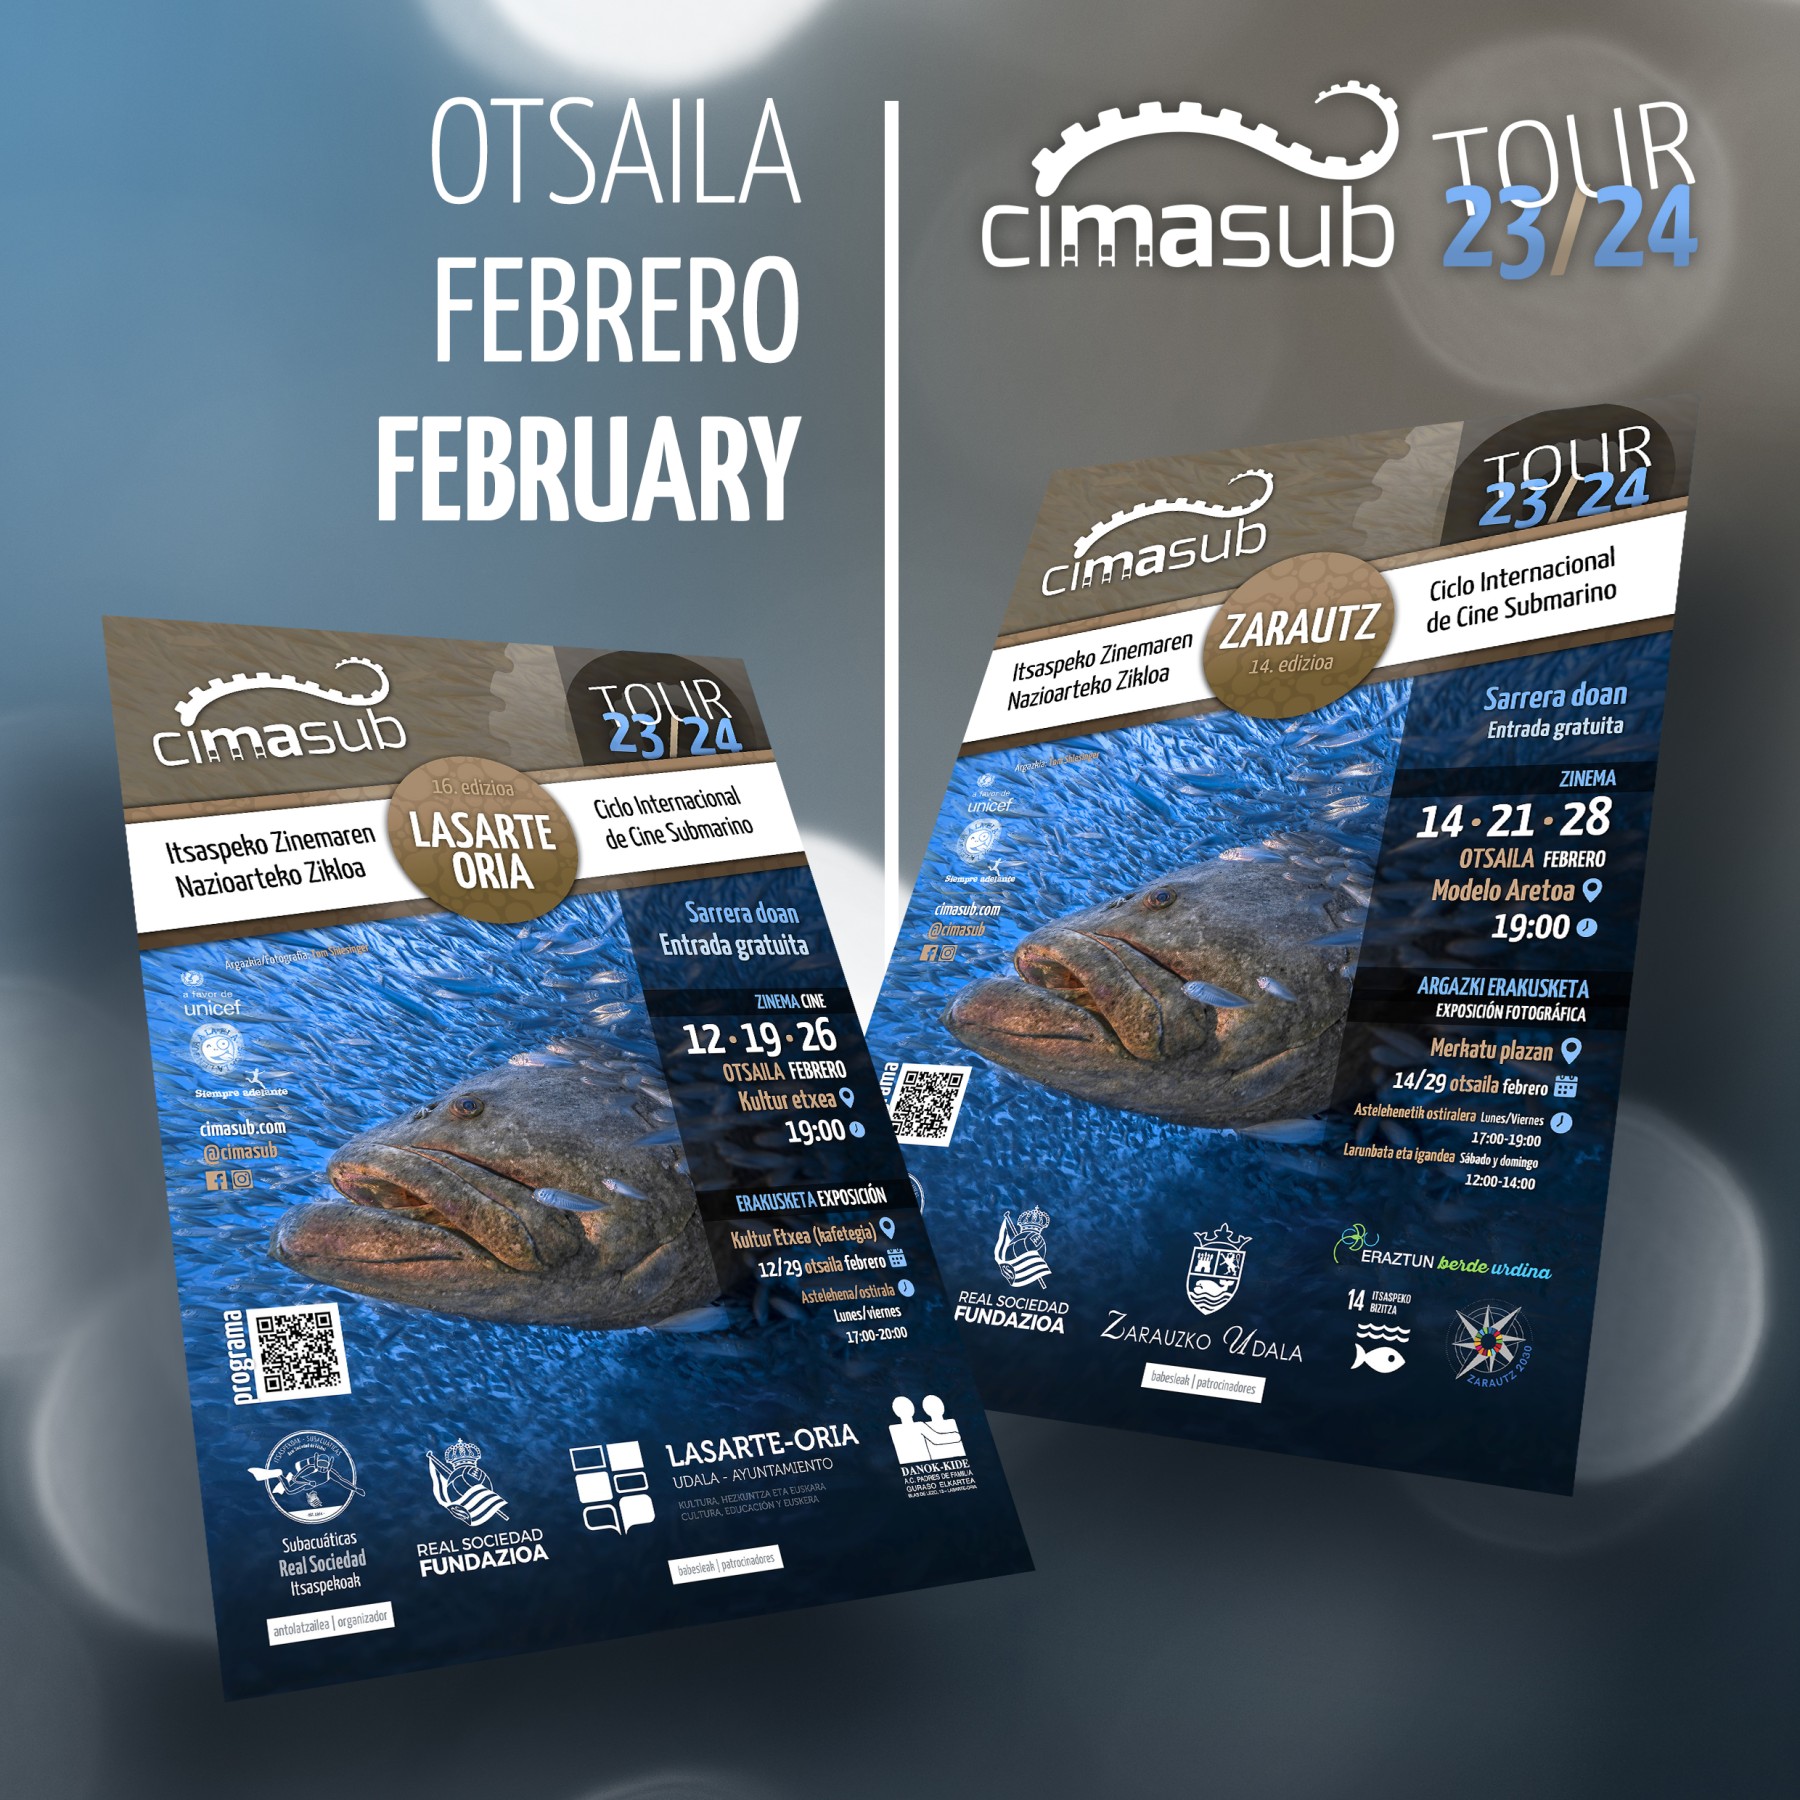 In February CIMASUB immerses Lasarte-Oria and Zarautz in an underwater show